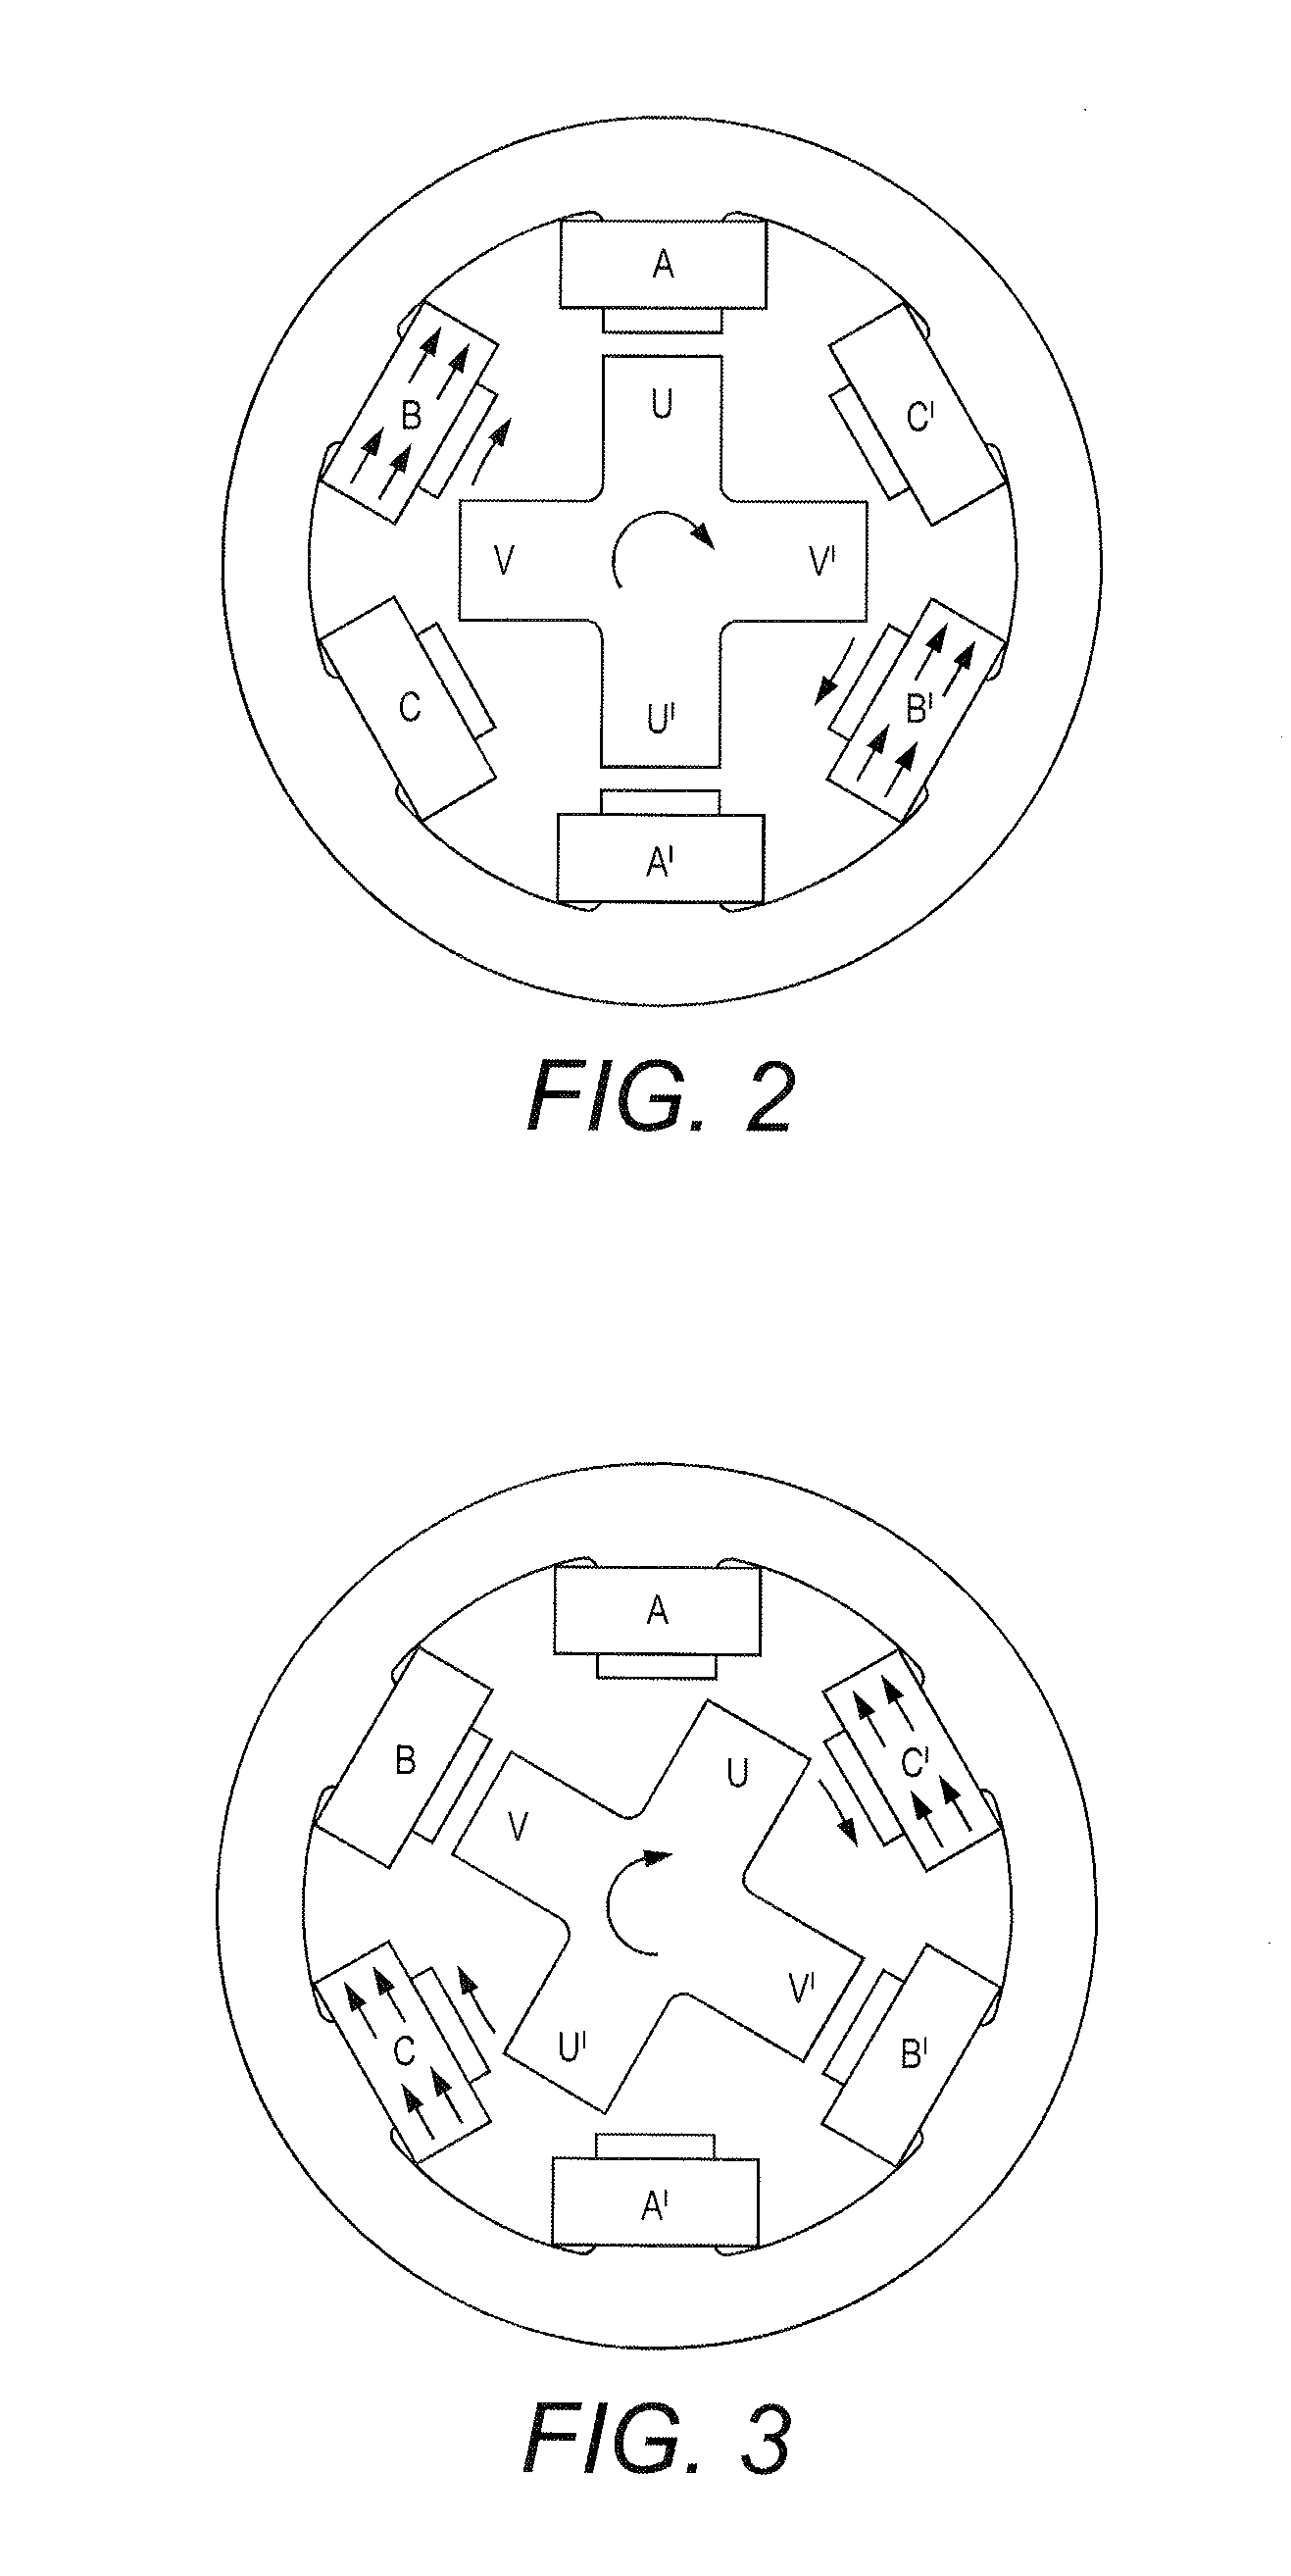 Switched reluctance motor starting methods